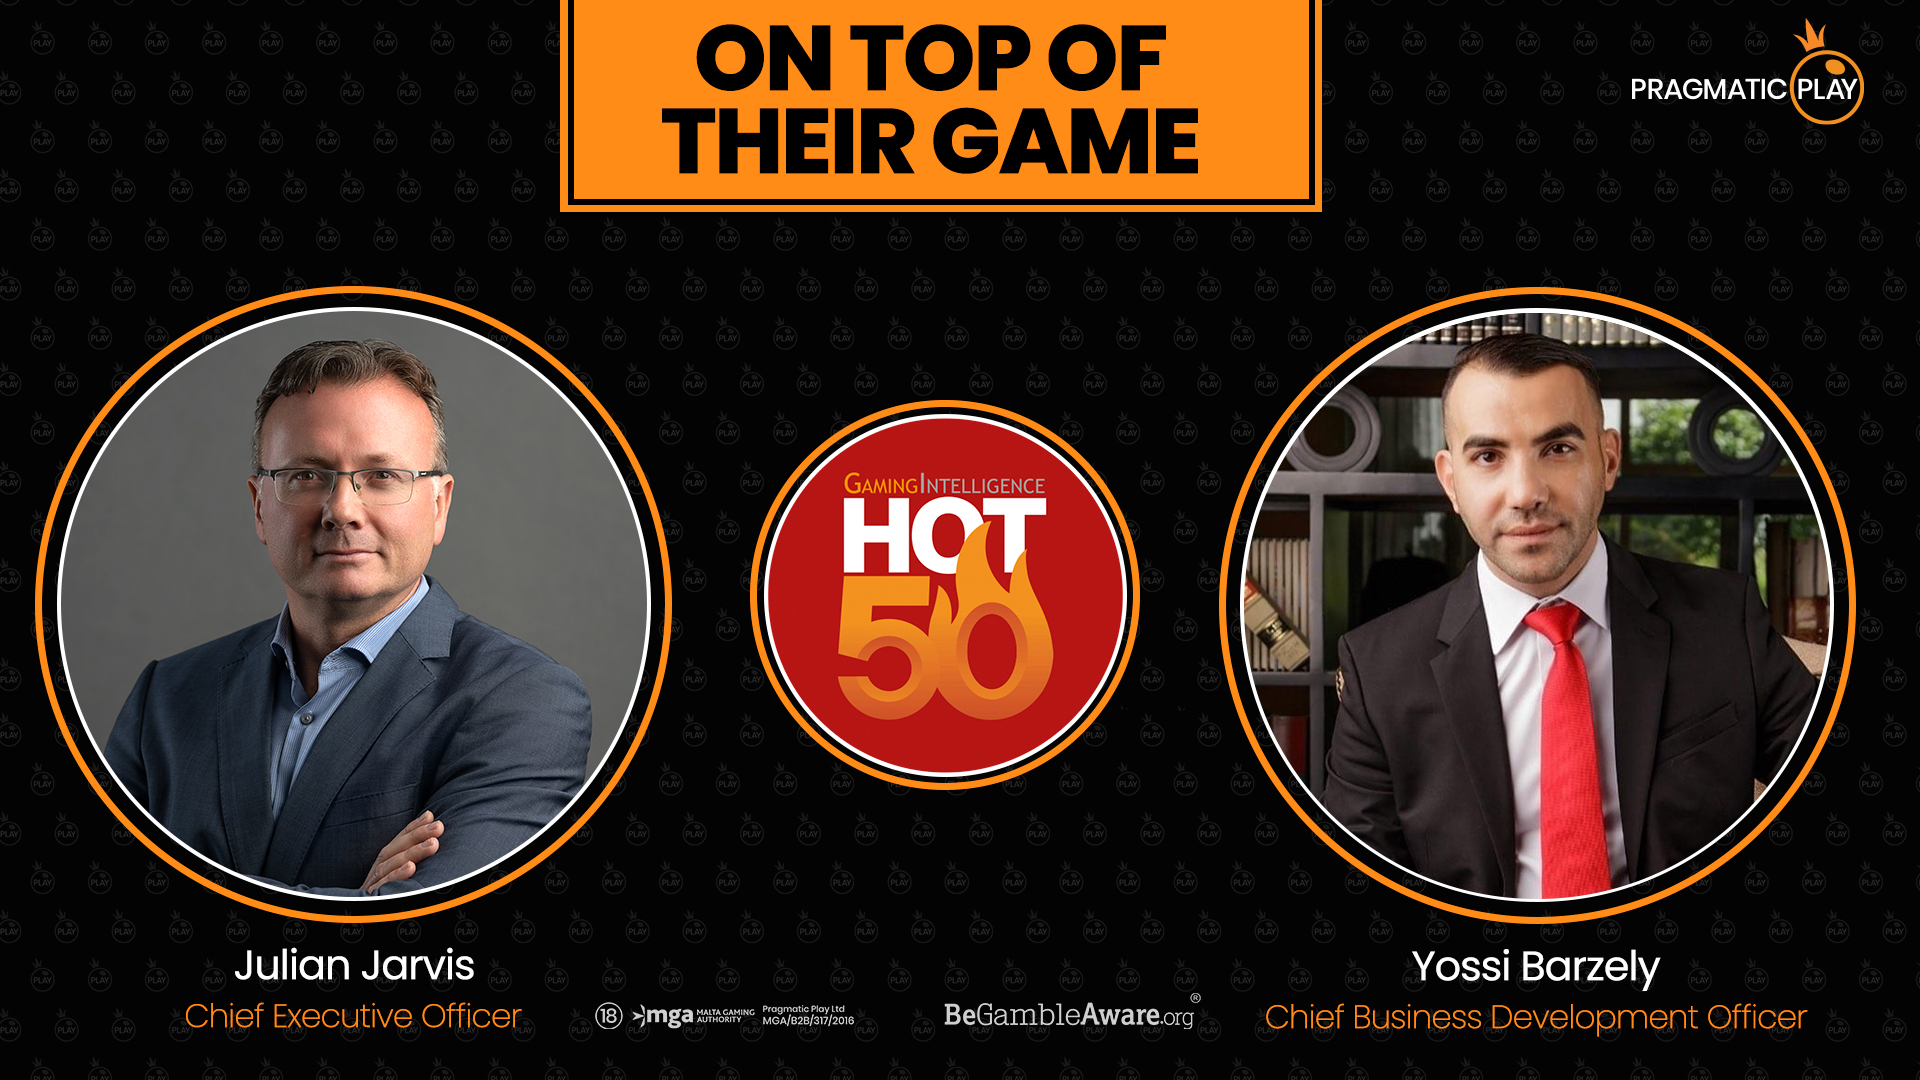 ON TOP OF THEIR GAME – PRAGMATIC PLAY EXECUTIVES TAKE THEIR PLACE ON THE HOT 50 LIST